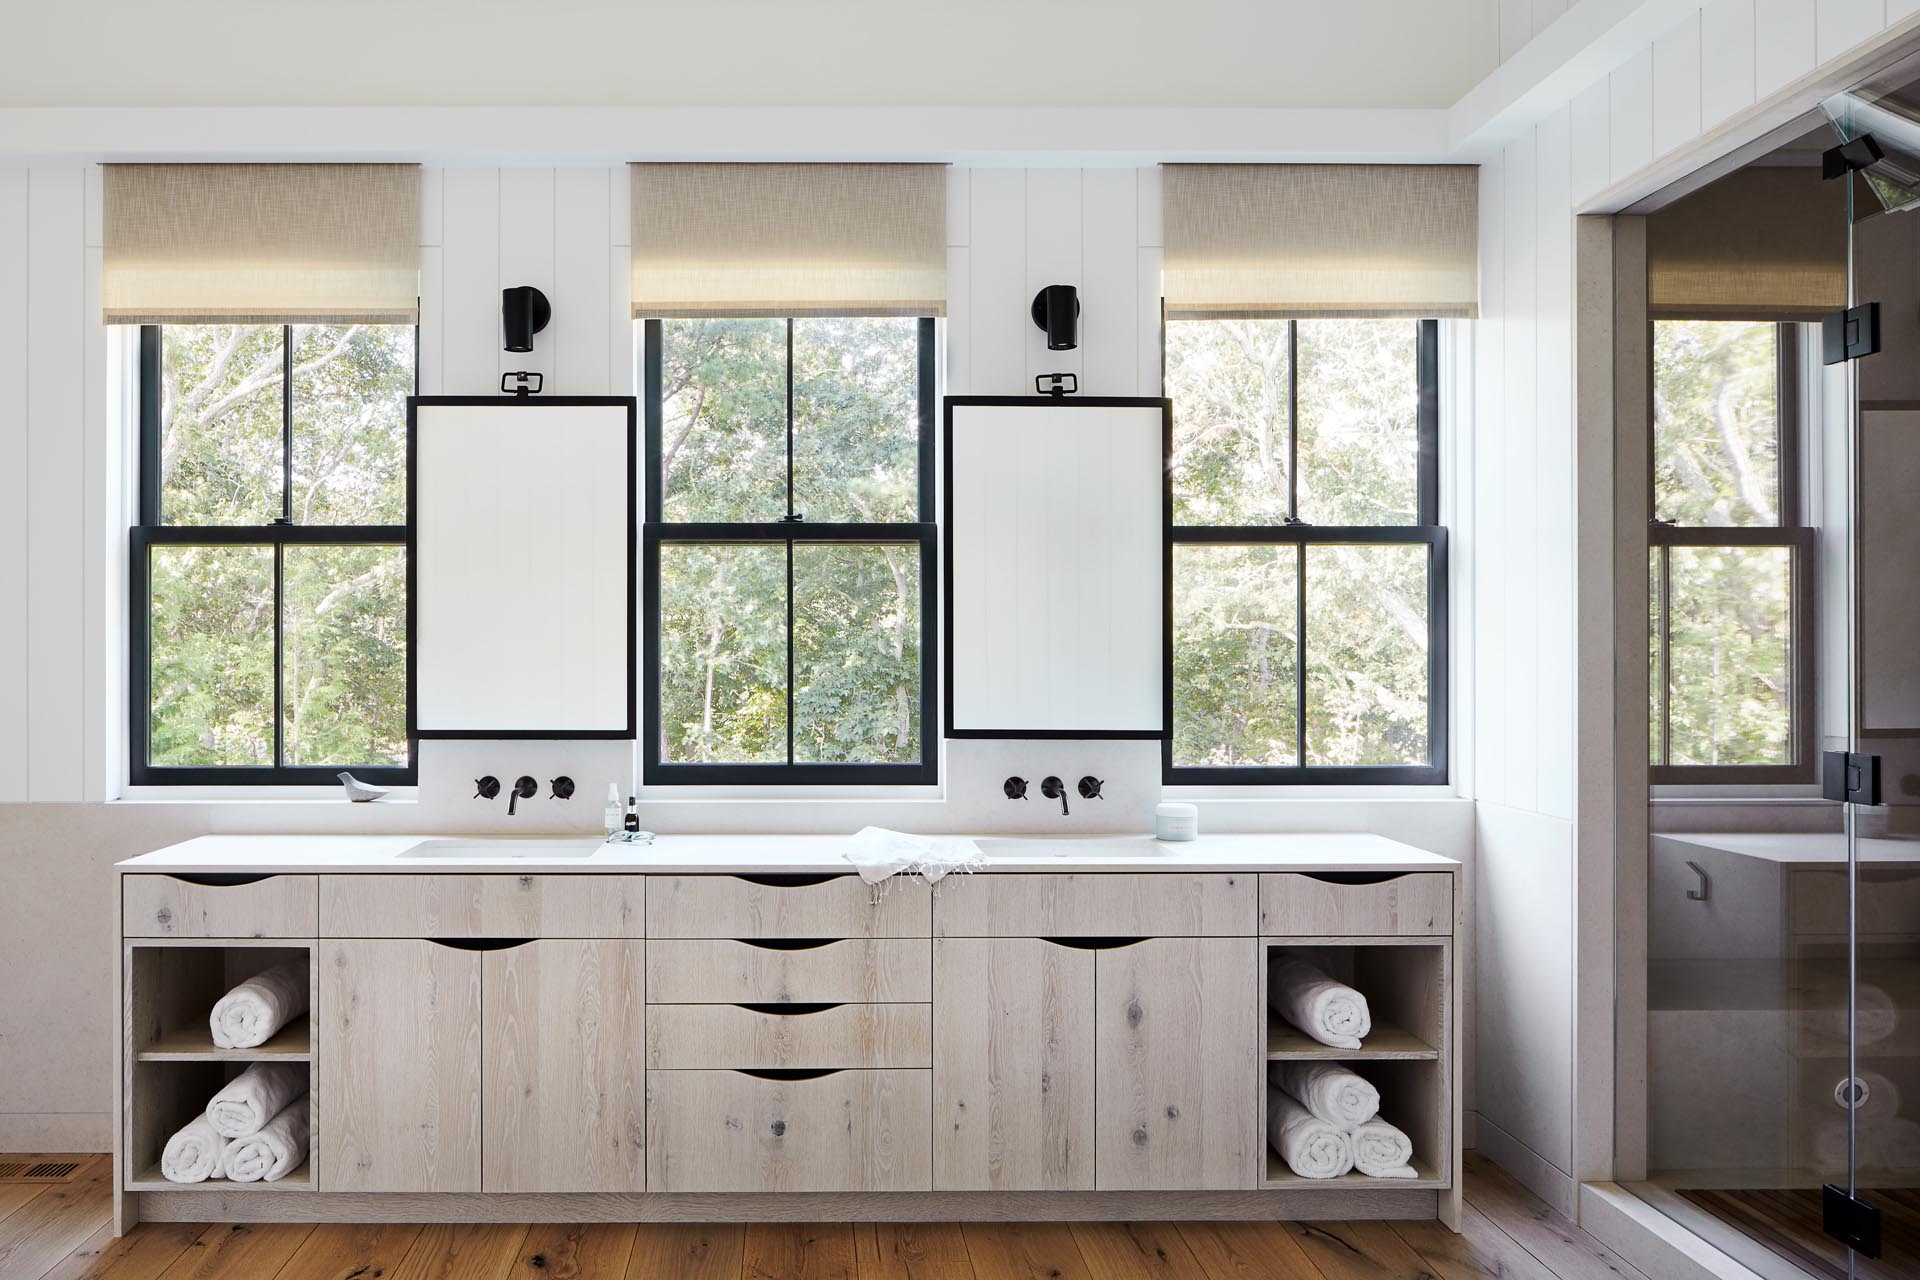 This master bathroom includes a long double sink vanity with the mirrors perfectly positioned between the black framed windows. Adjacent to the vanity is a walk-in shower with benches and double shower heads.